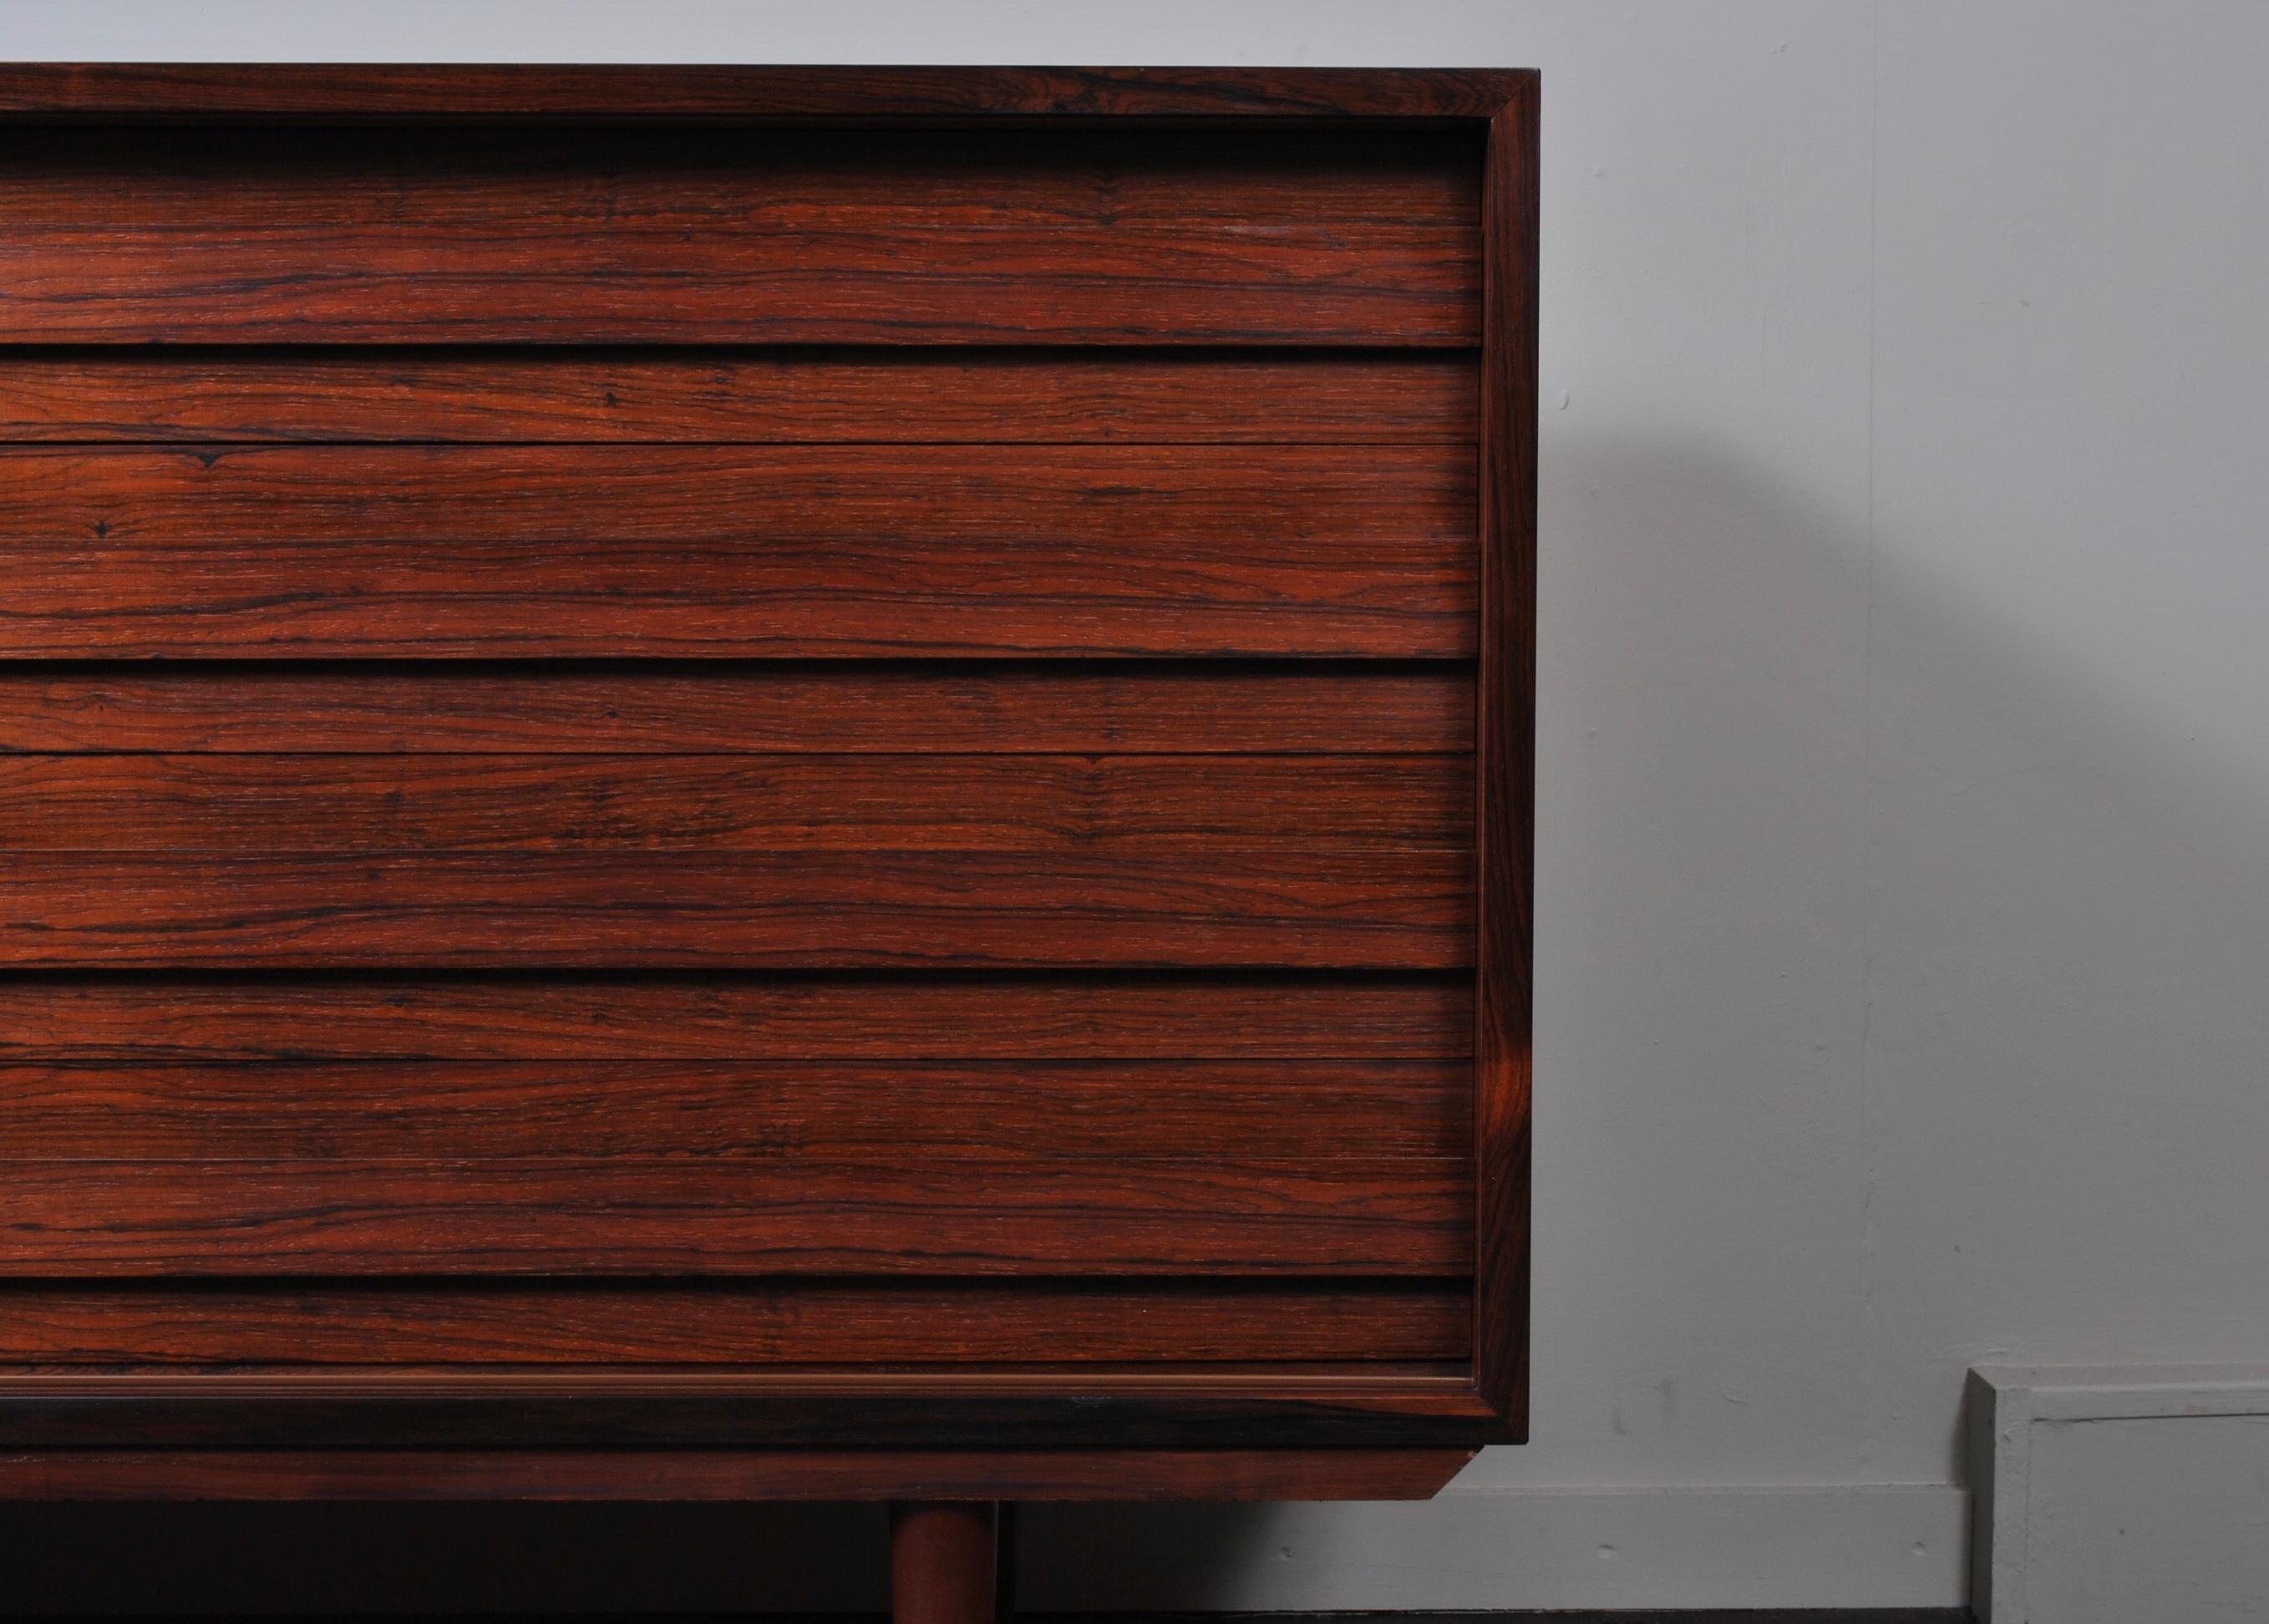 A modernist Danish midcentury rosewood sideboard by Dammand Rasmussen. Produced in Denmark circa 1960. Lovely color and in great condition. One sliding door to the left with an internal adjustable shelf and drawers to the right.